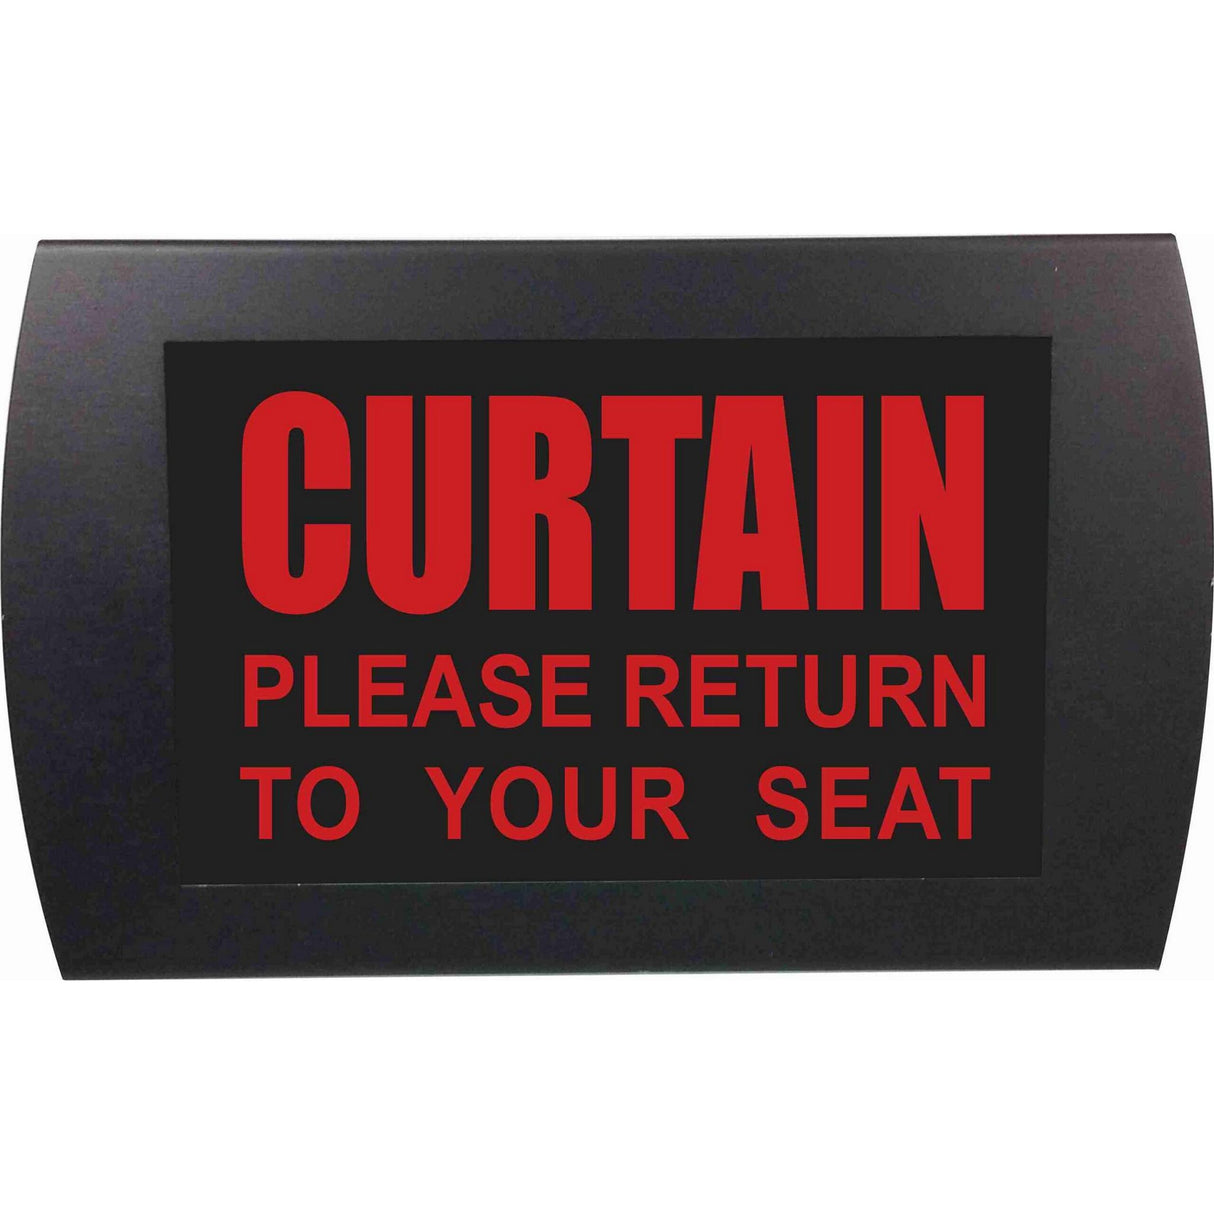 American Recorder OAS-2029M-RD "CURTAIN - PLEASE RETURN TO YOUR SEAT" LED Lighted Sign, Red